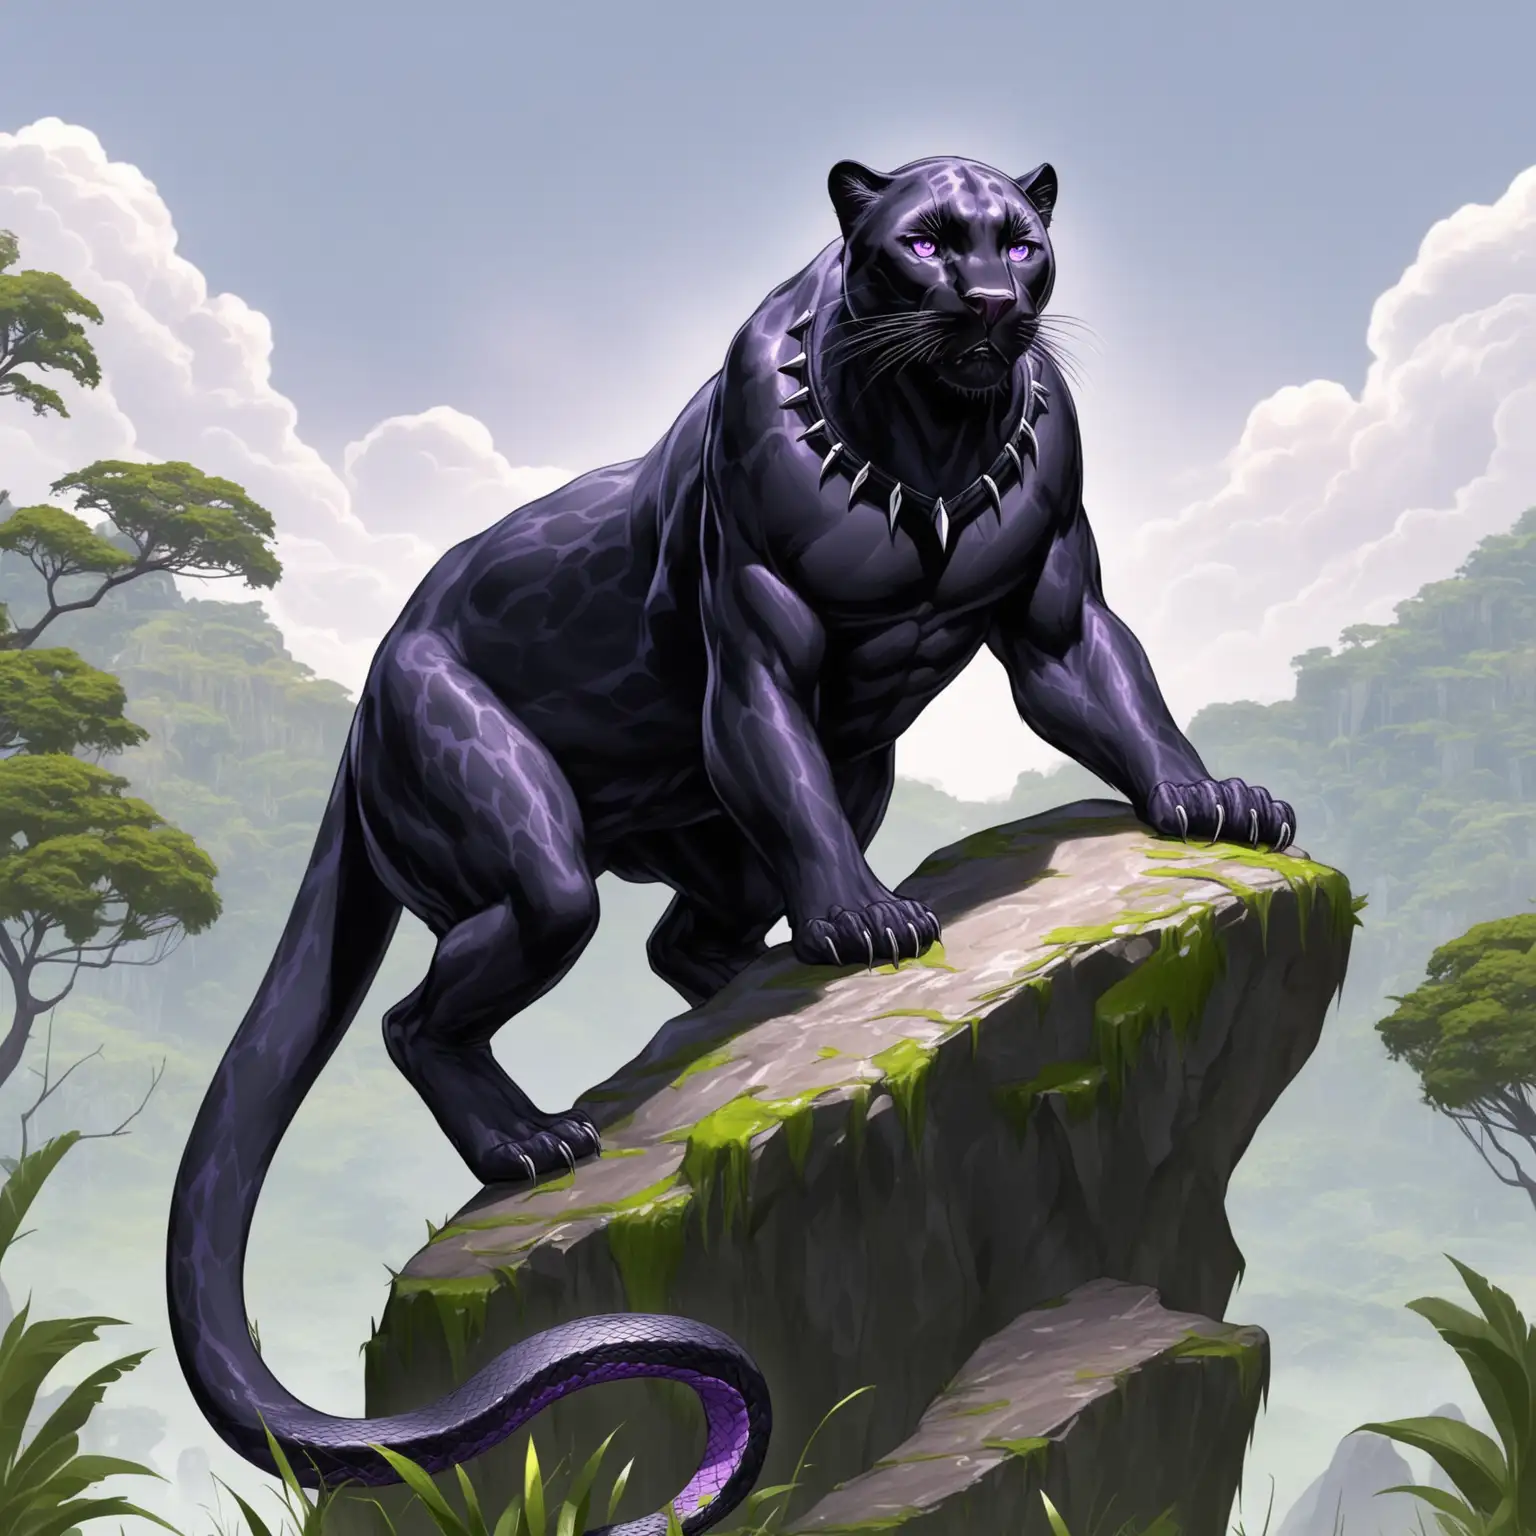 huge black panther, snake for a tail, purple eyes, standing on rock